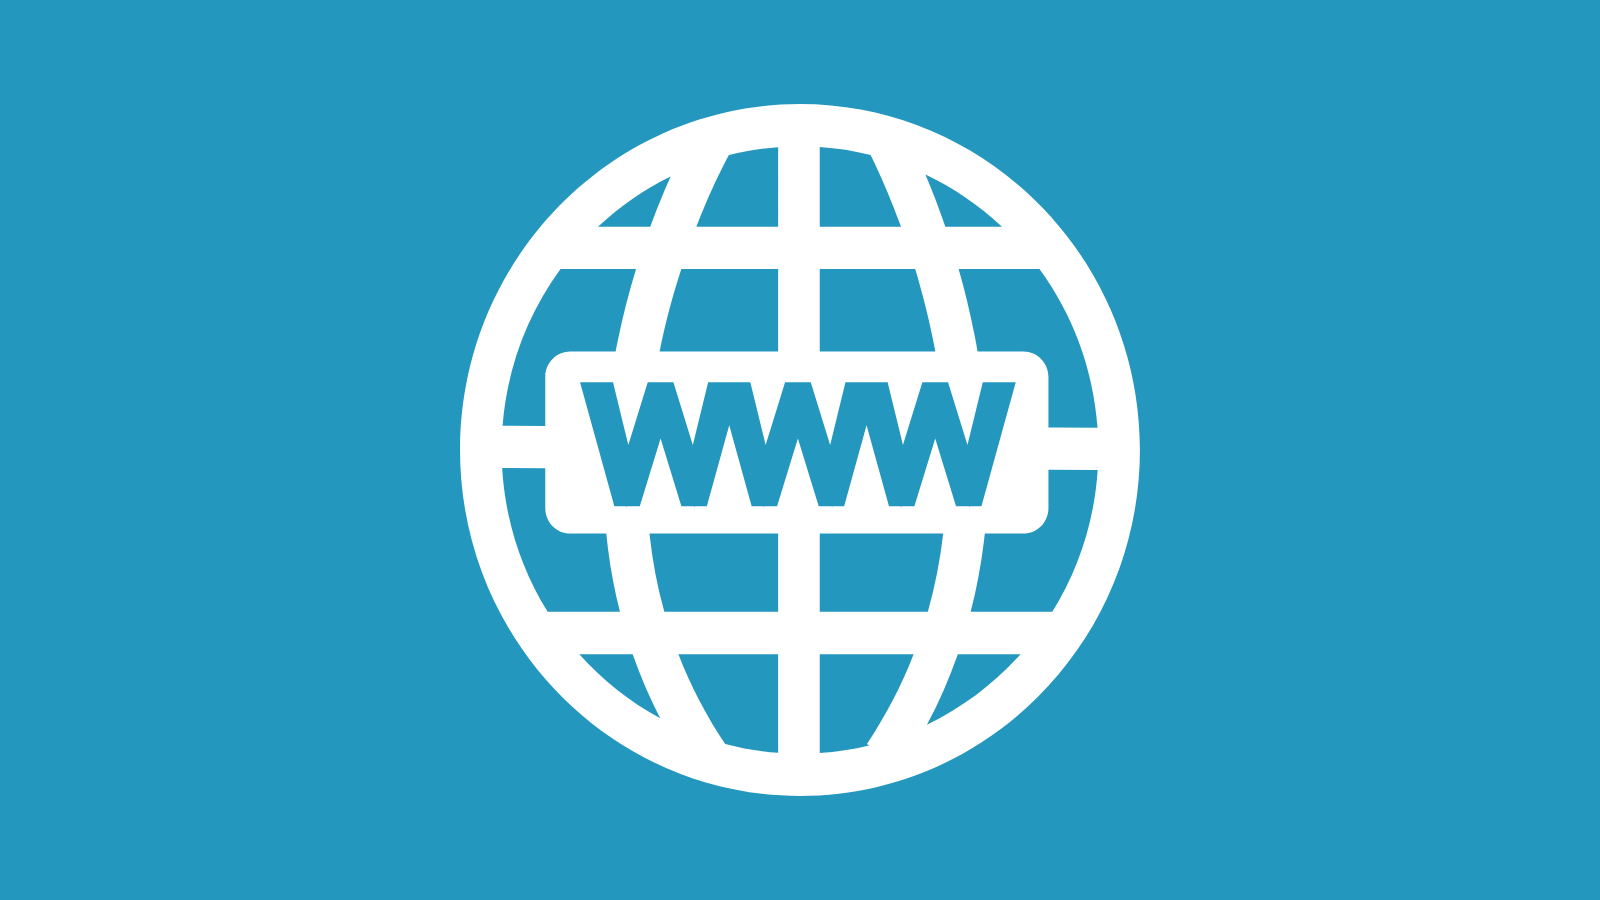 A World Wide Web icon with a globe and the letters "www"